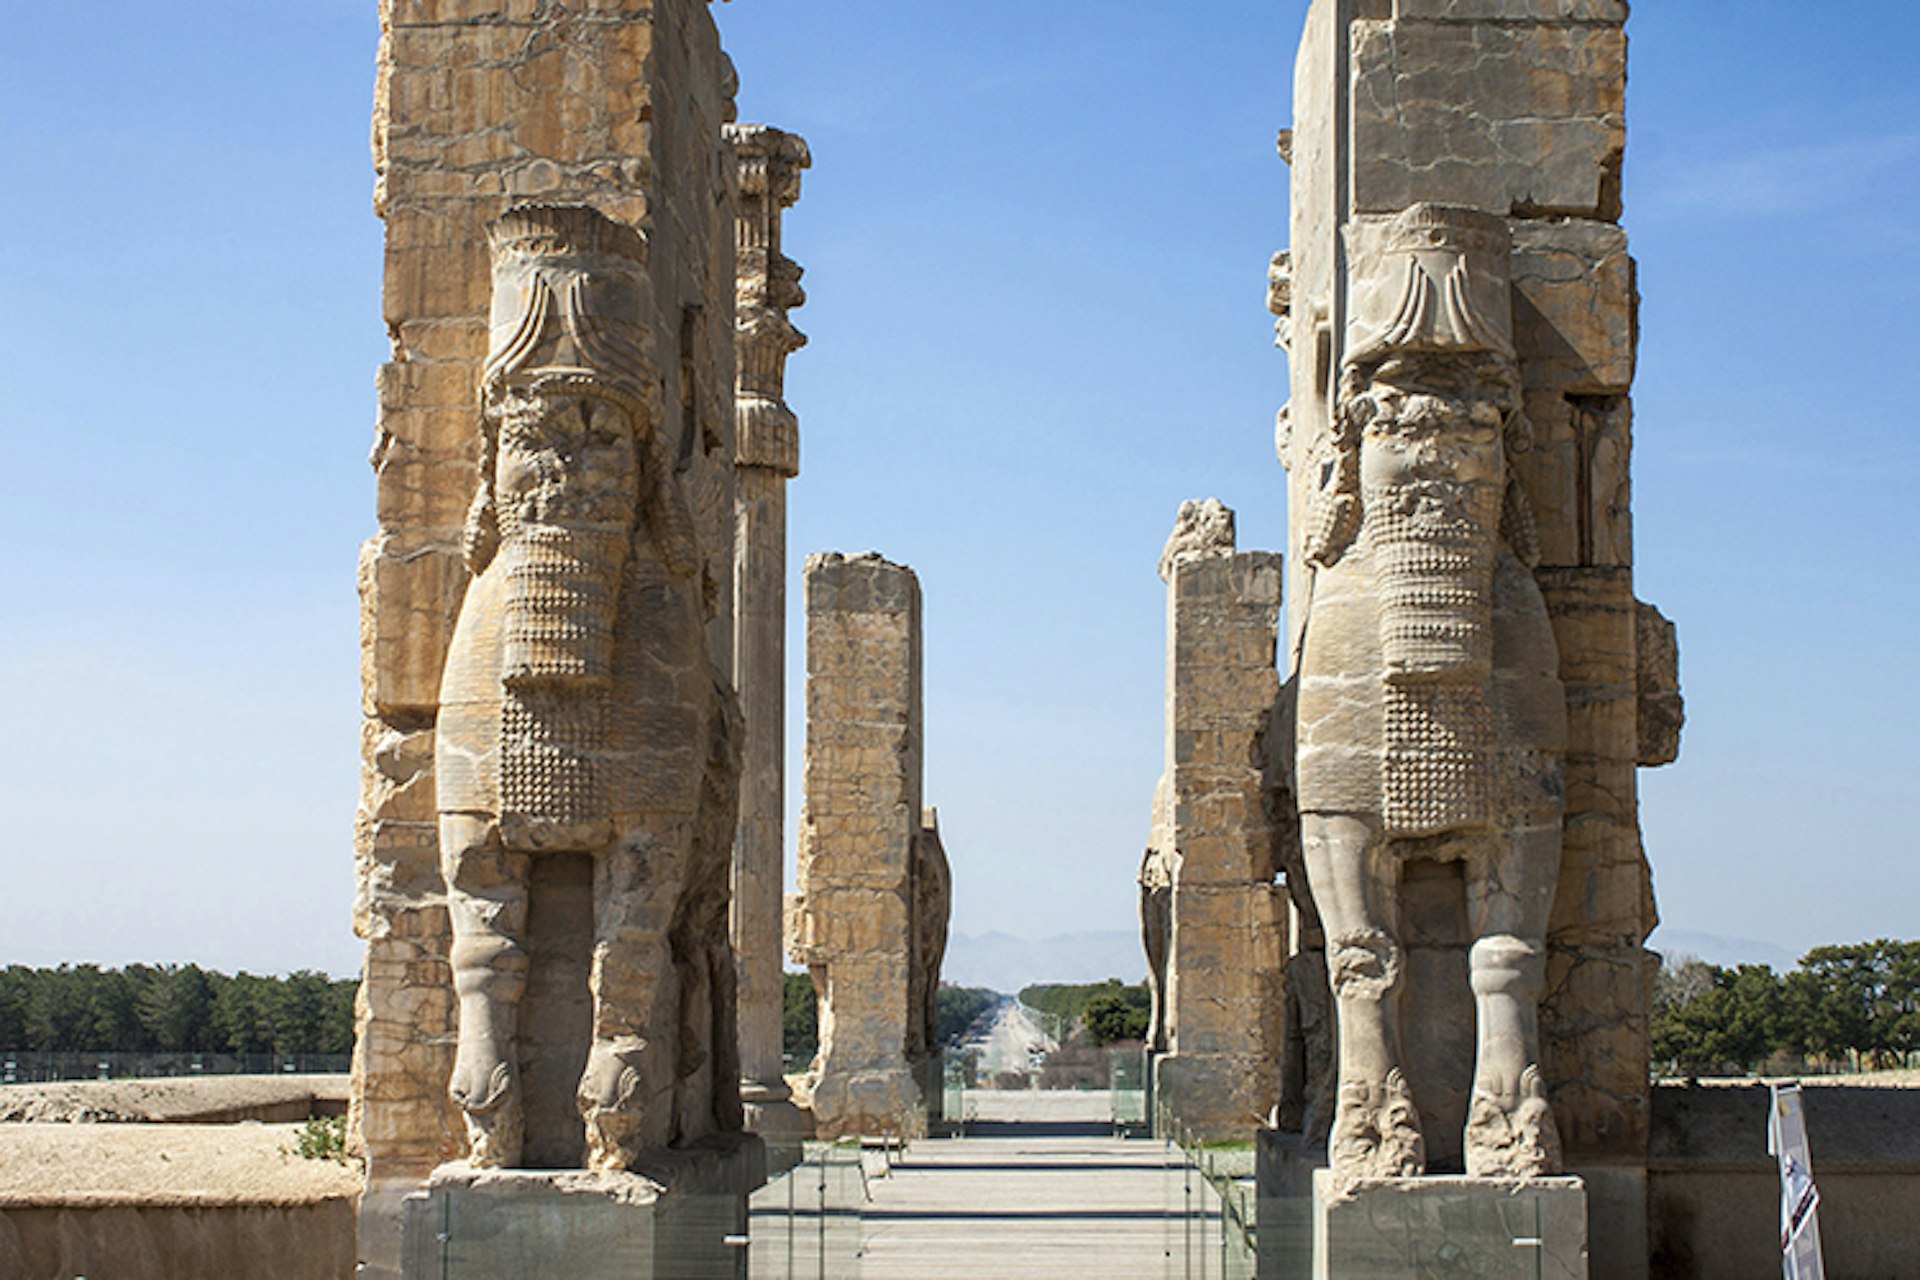 Only a few fragments of Persepolis' original splendour remain, but it remains an awe-inspiring site. Image by mathess / iStock / Getty Images